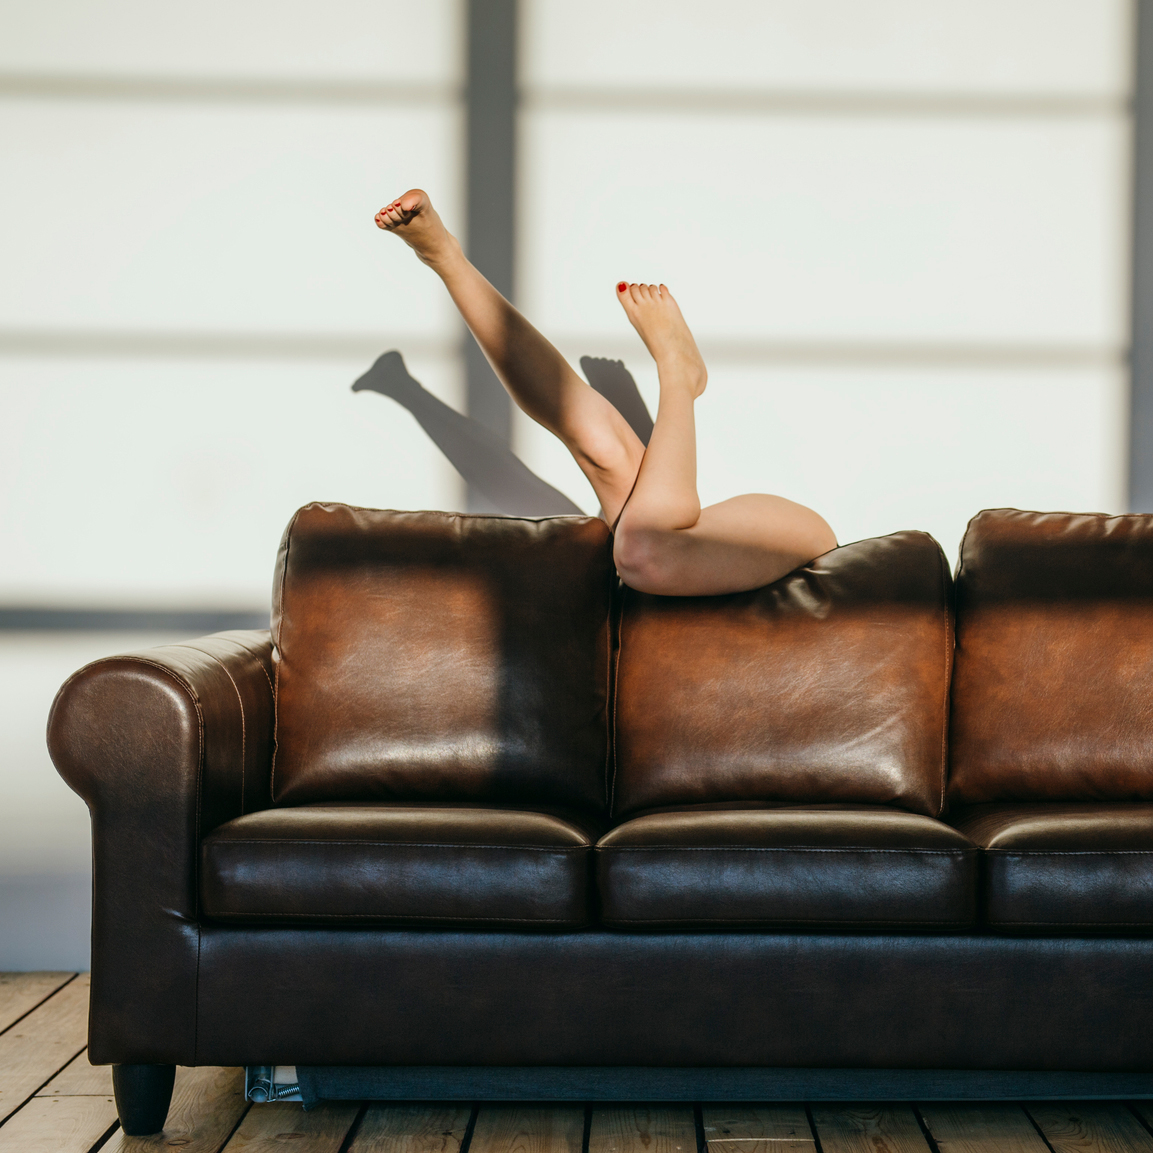 Sexy woman at home under direct sunlight slippage behind brown leather couch